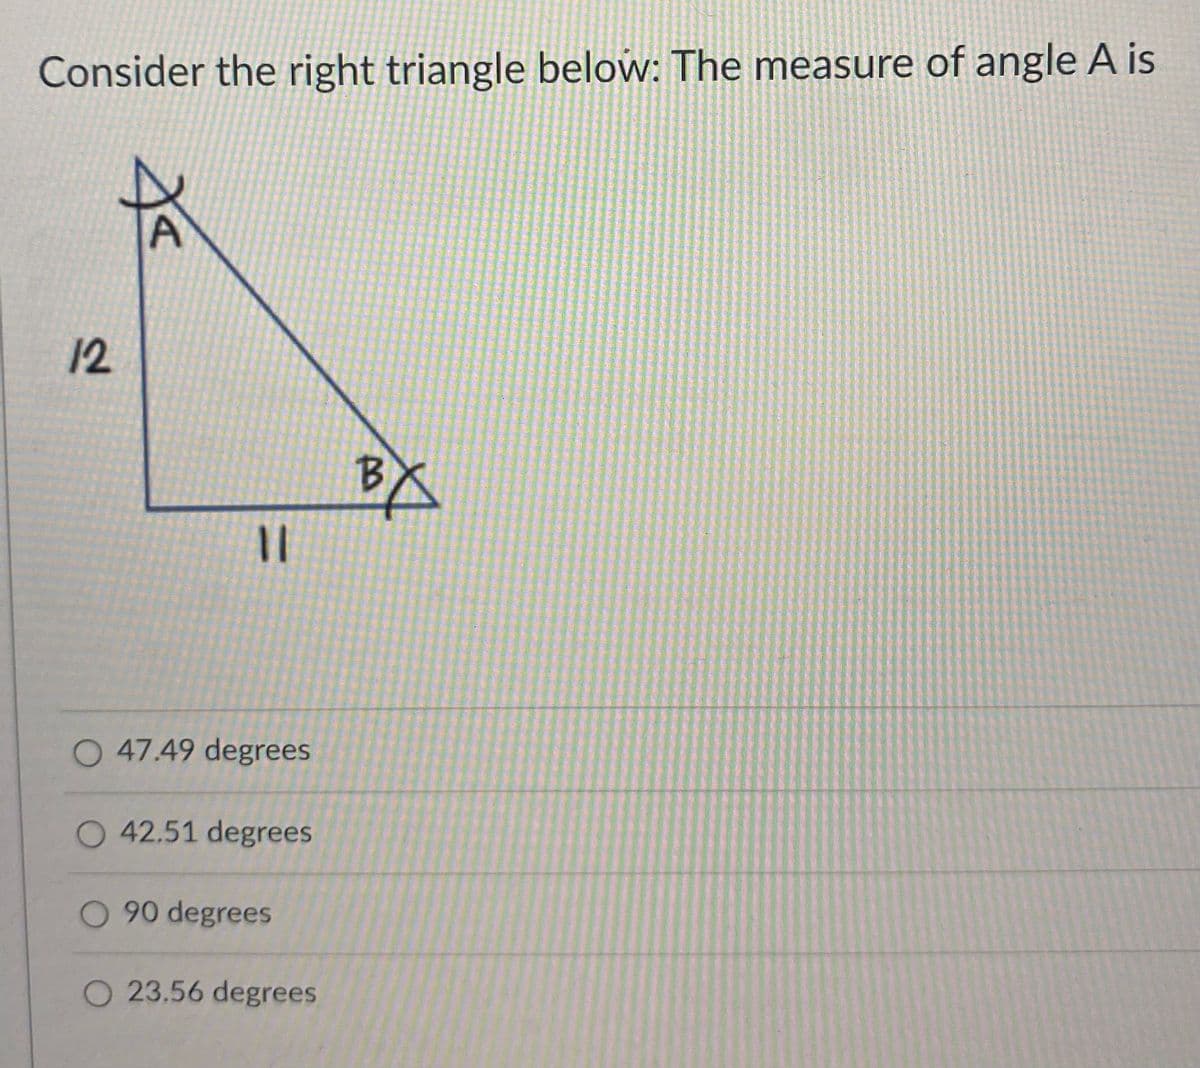 Consider the right triangle below: The measure of angle A is
12
B.
%3|
O 47.49 degrees
42.51 degrees
O 90 degrees
O 23.56 degrees
